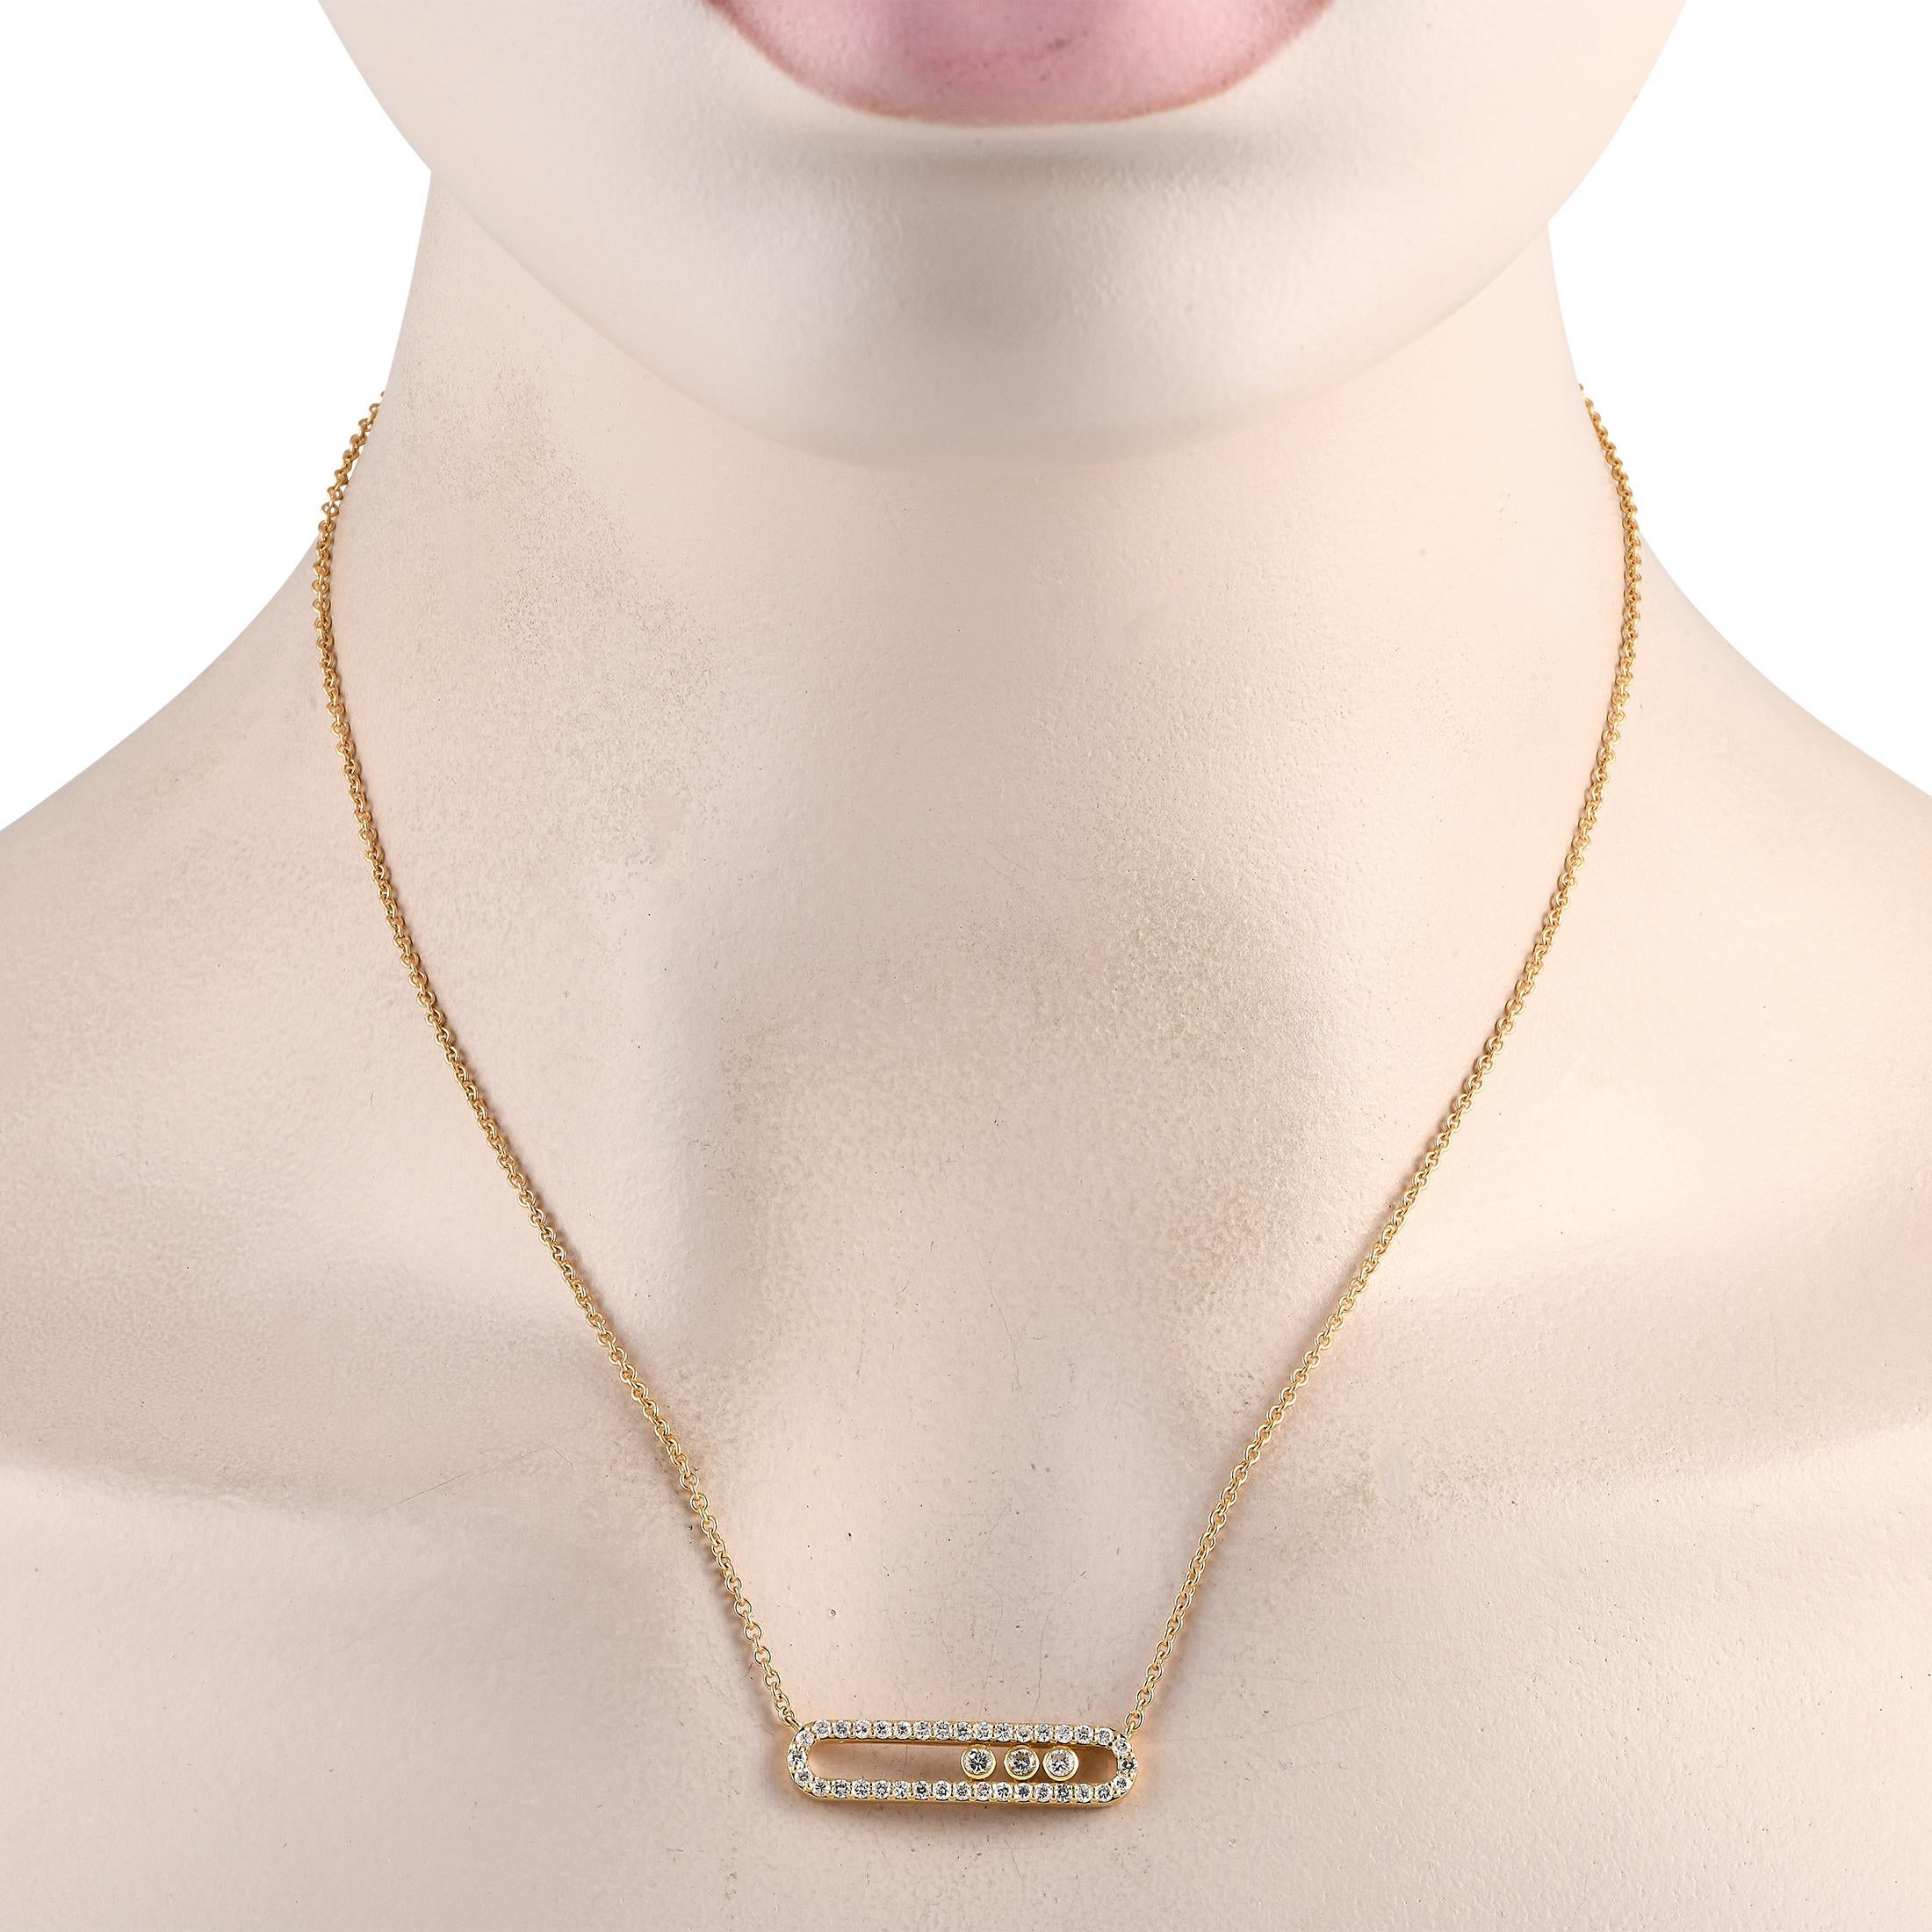 Despite its dynamic design, this opulent necklace is ideal for everyday wear. The sleek, sophisticated pendant is adorned with sparkling diamonds totaling 0.70 carats. Suspended at the center of a 16” chain, it measures 0.15” long and 1.10” wide. 
